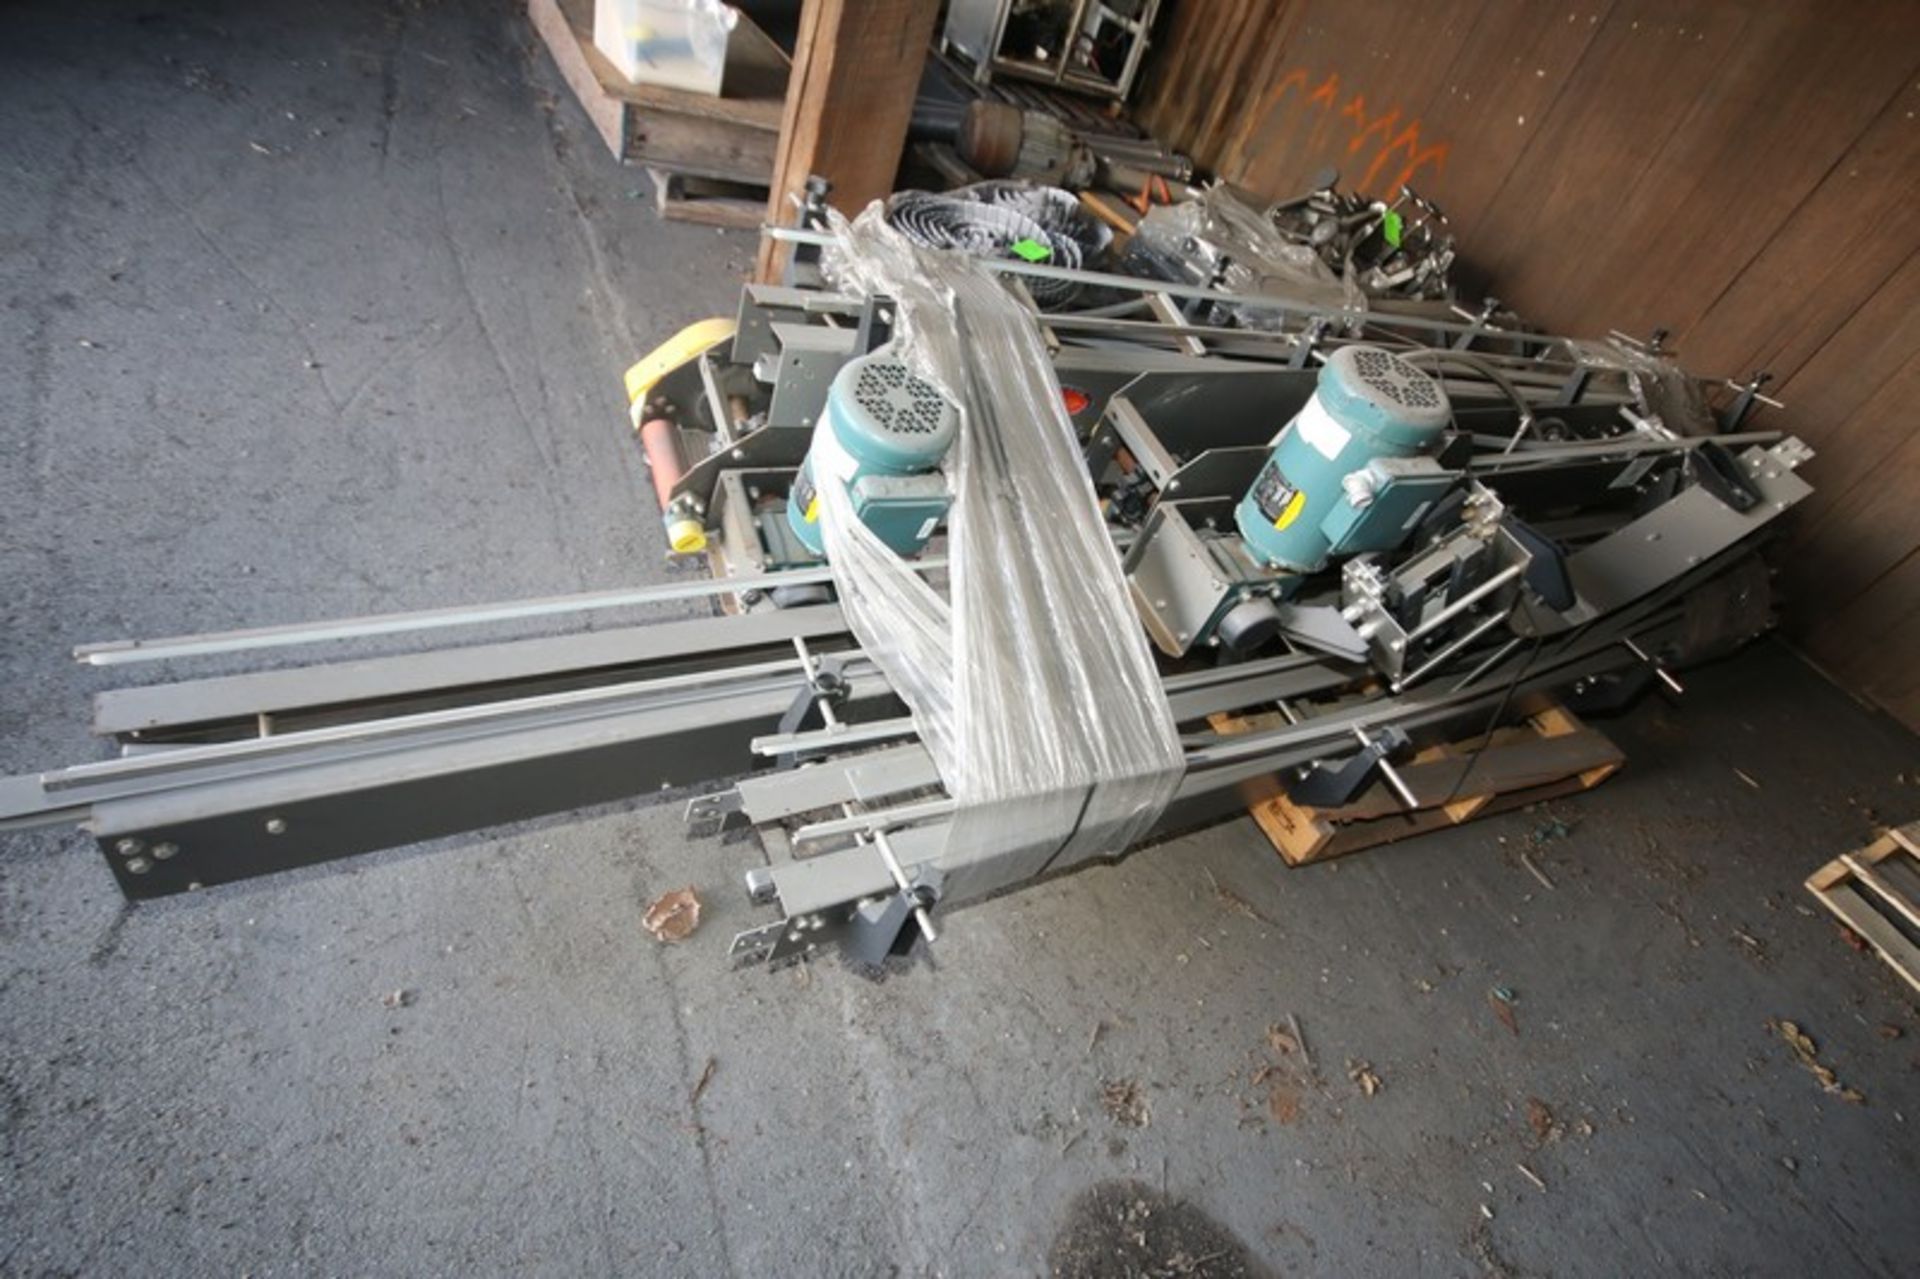 Lot of (10) Sections of Multi Conveyor 8" W Product Conveyor, Over (60) Feet Total, From 4' L to 13'